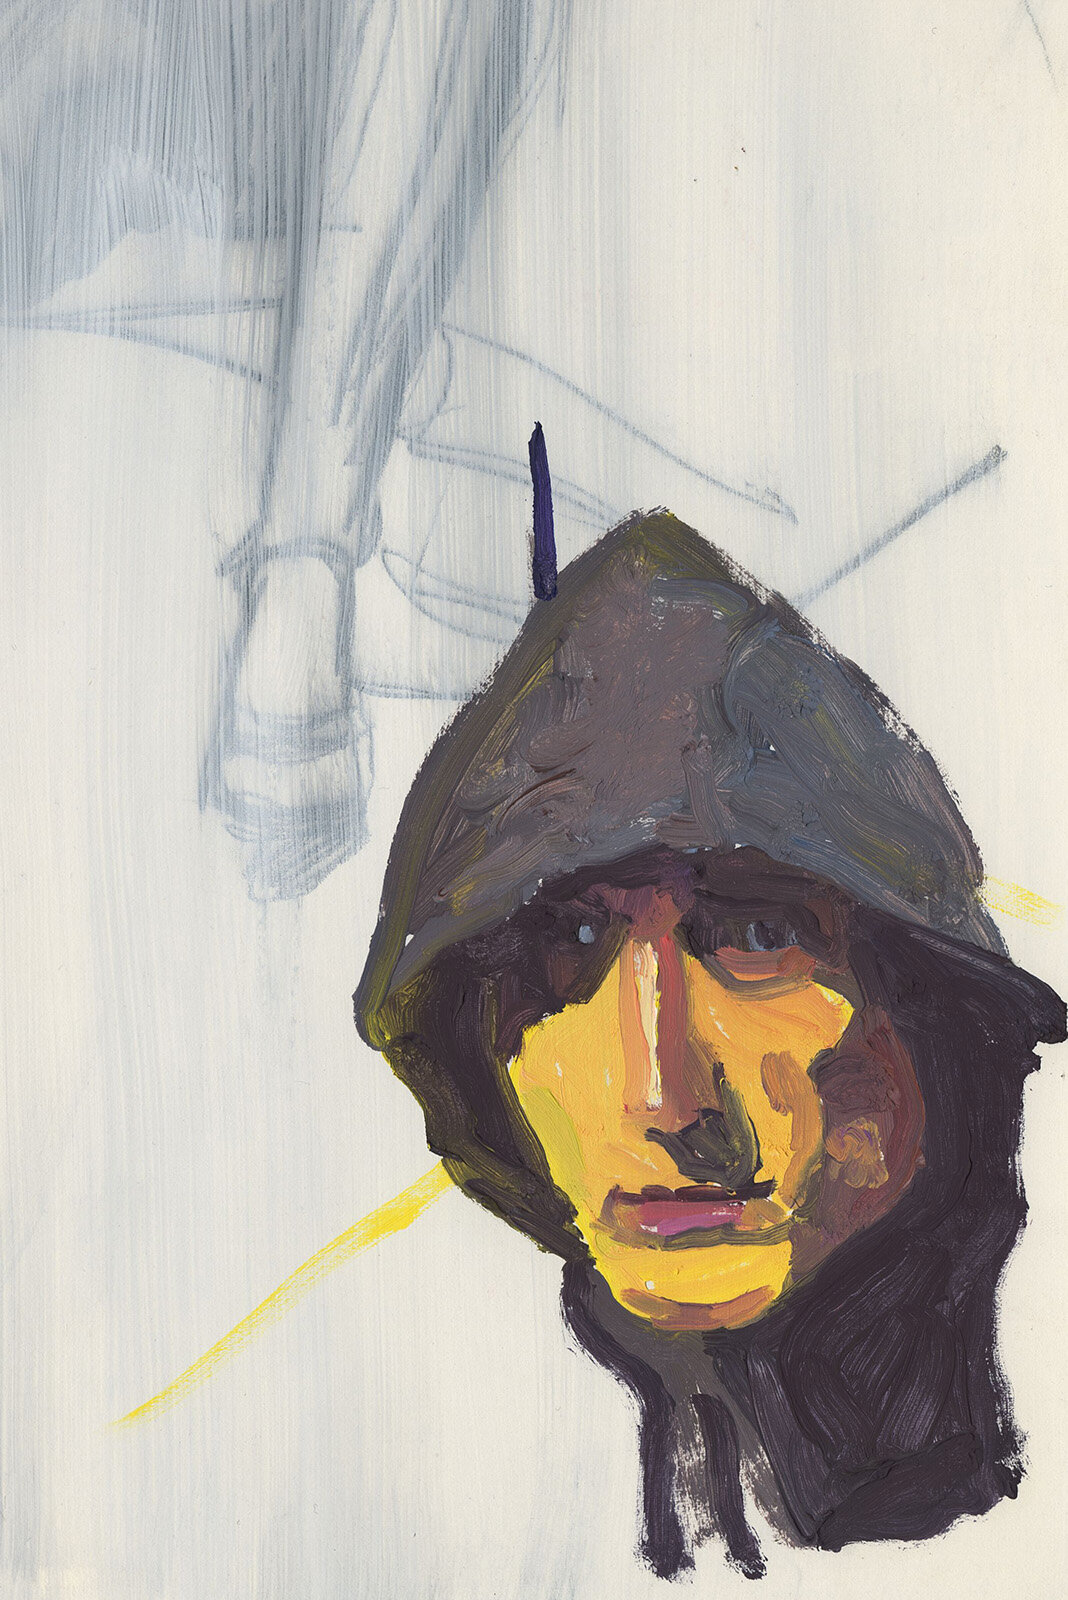 Hooded, Aug. 23, 2020 (30-minute painting)